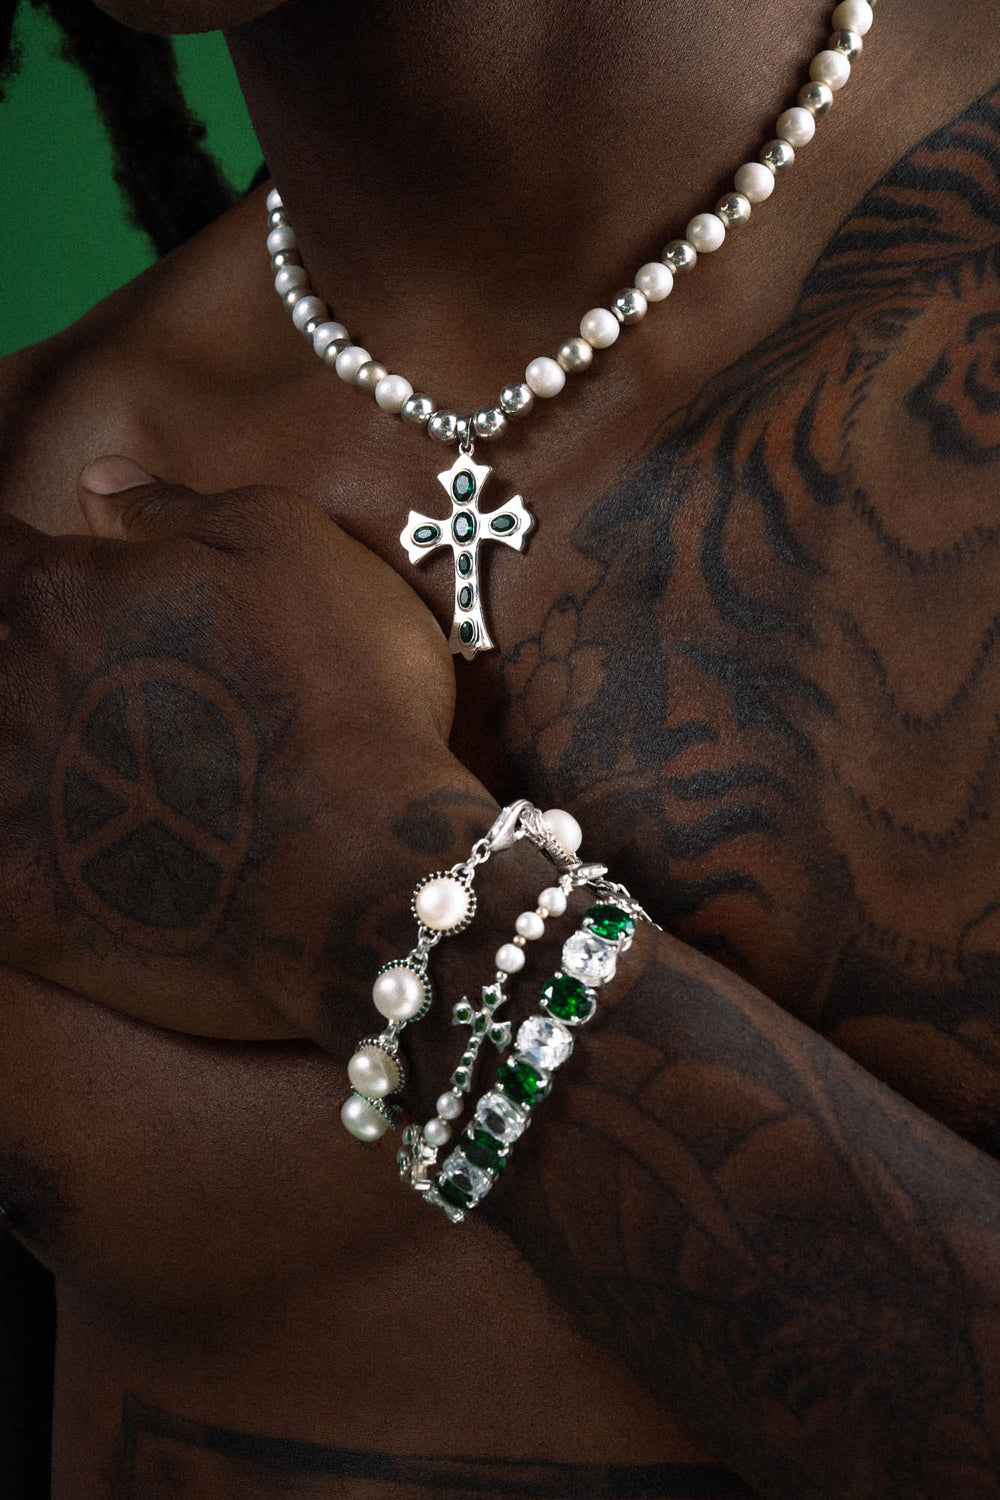 The Green Cross Freshwater Pearl Necklace in White Gold